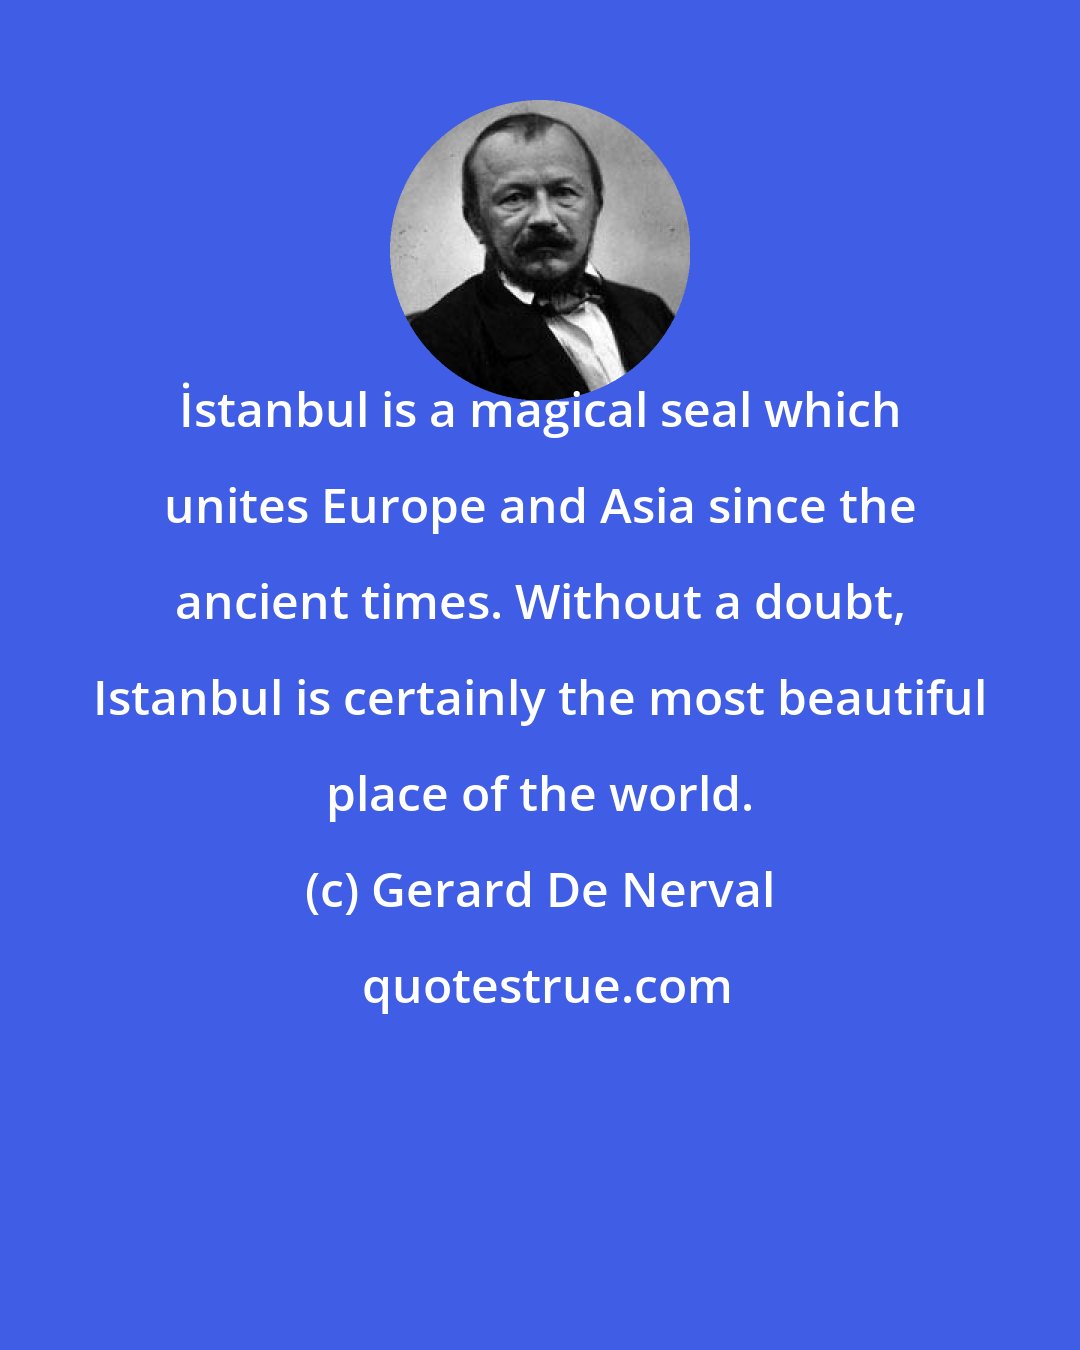 Gerard De Nerval: İstanbul is a magical seal which unites Europe and Asia since the ancient times. Without a doubt, Istanbul is certainly the most beautiful place of the world.